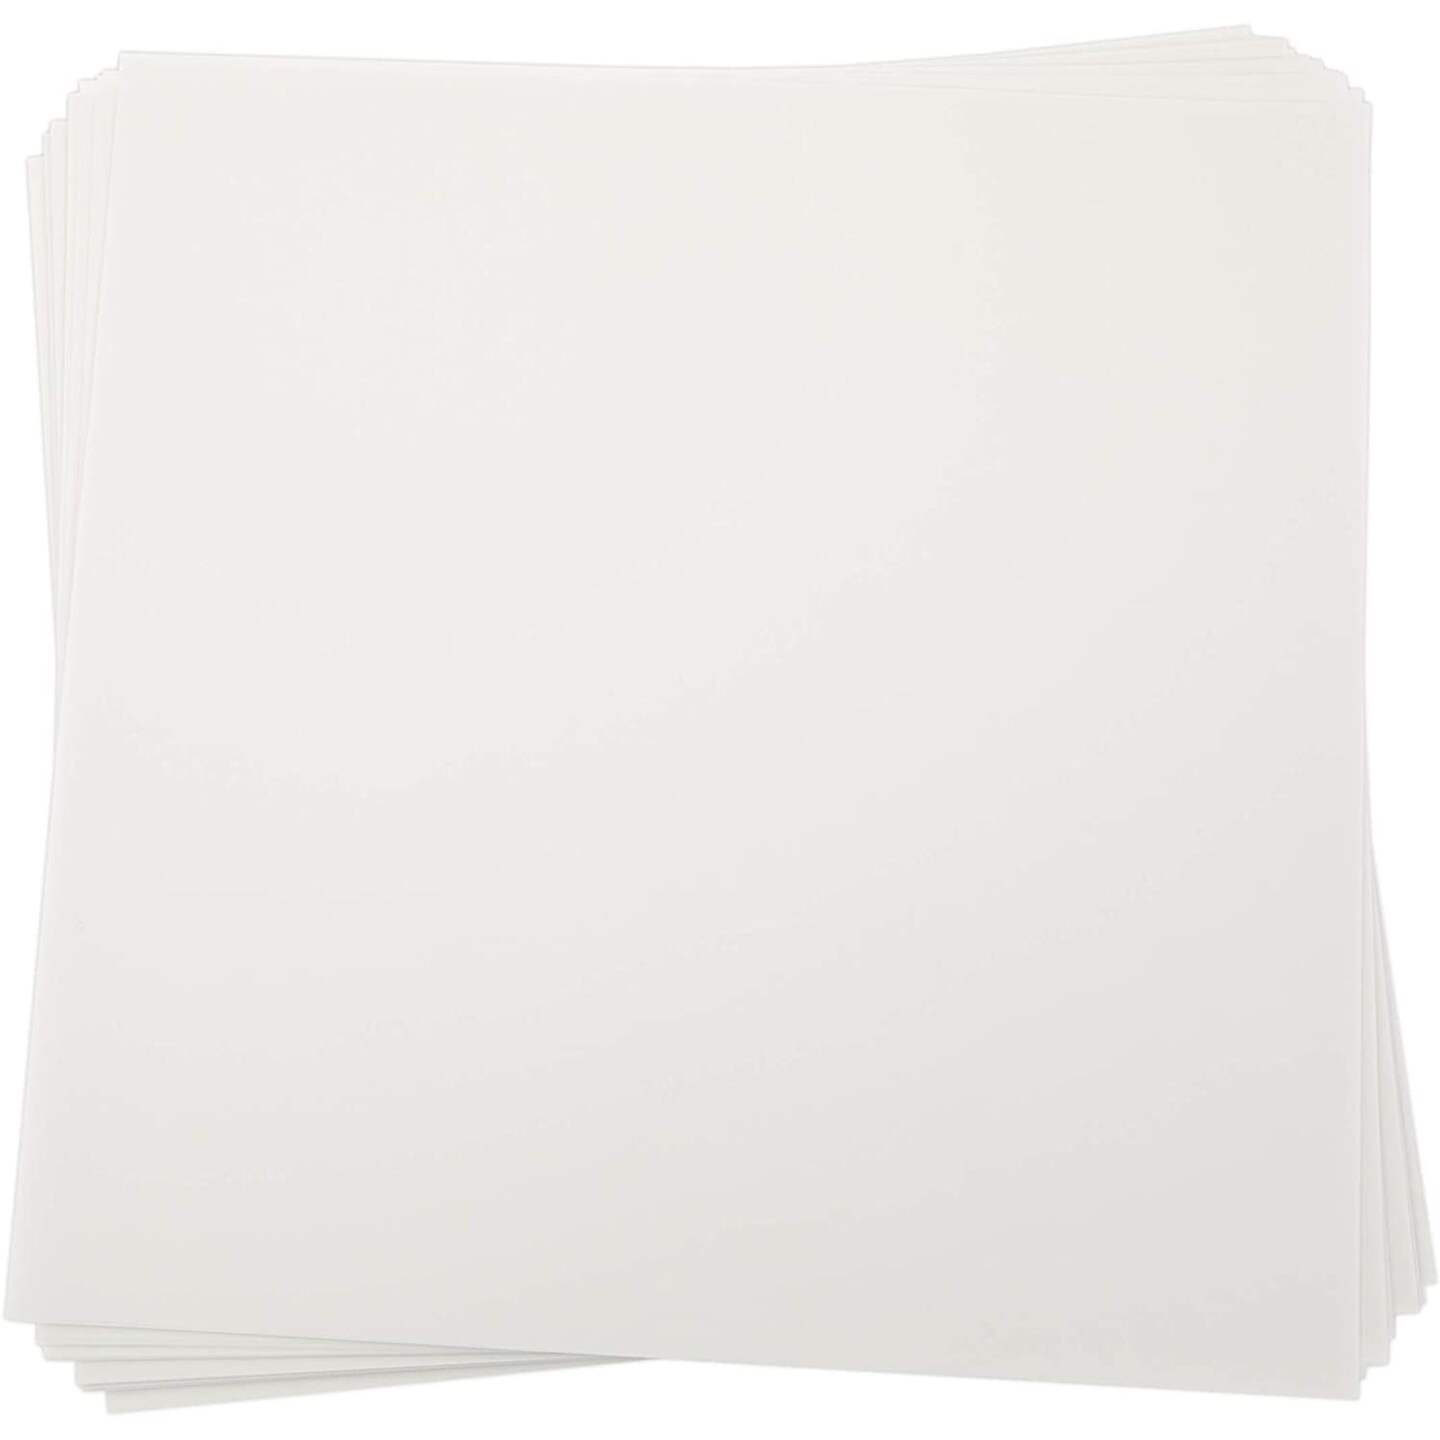 Vellum Paper for Invitations, Translucent Sheets (White, 12x12 in, 100 Sheets)